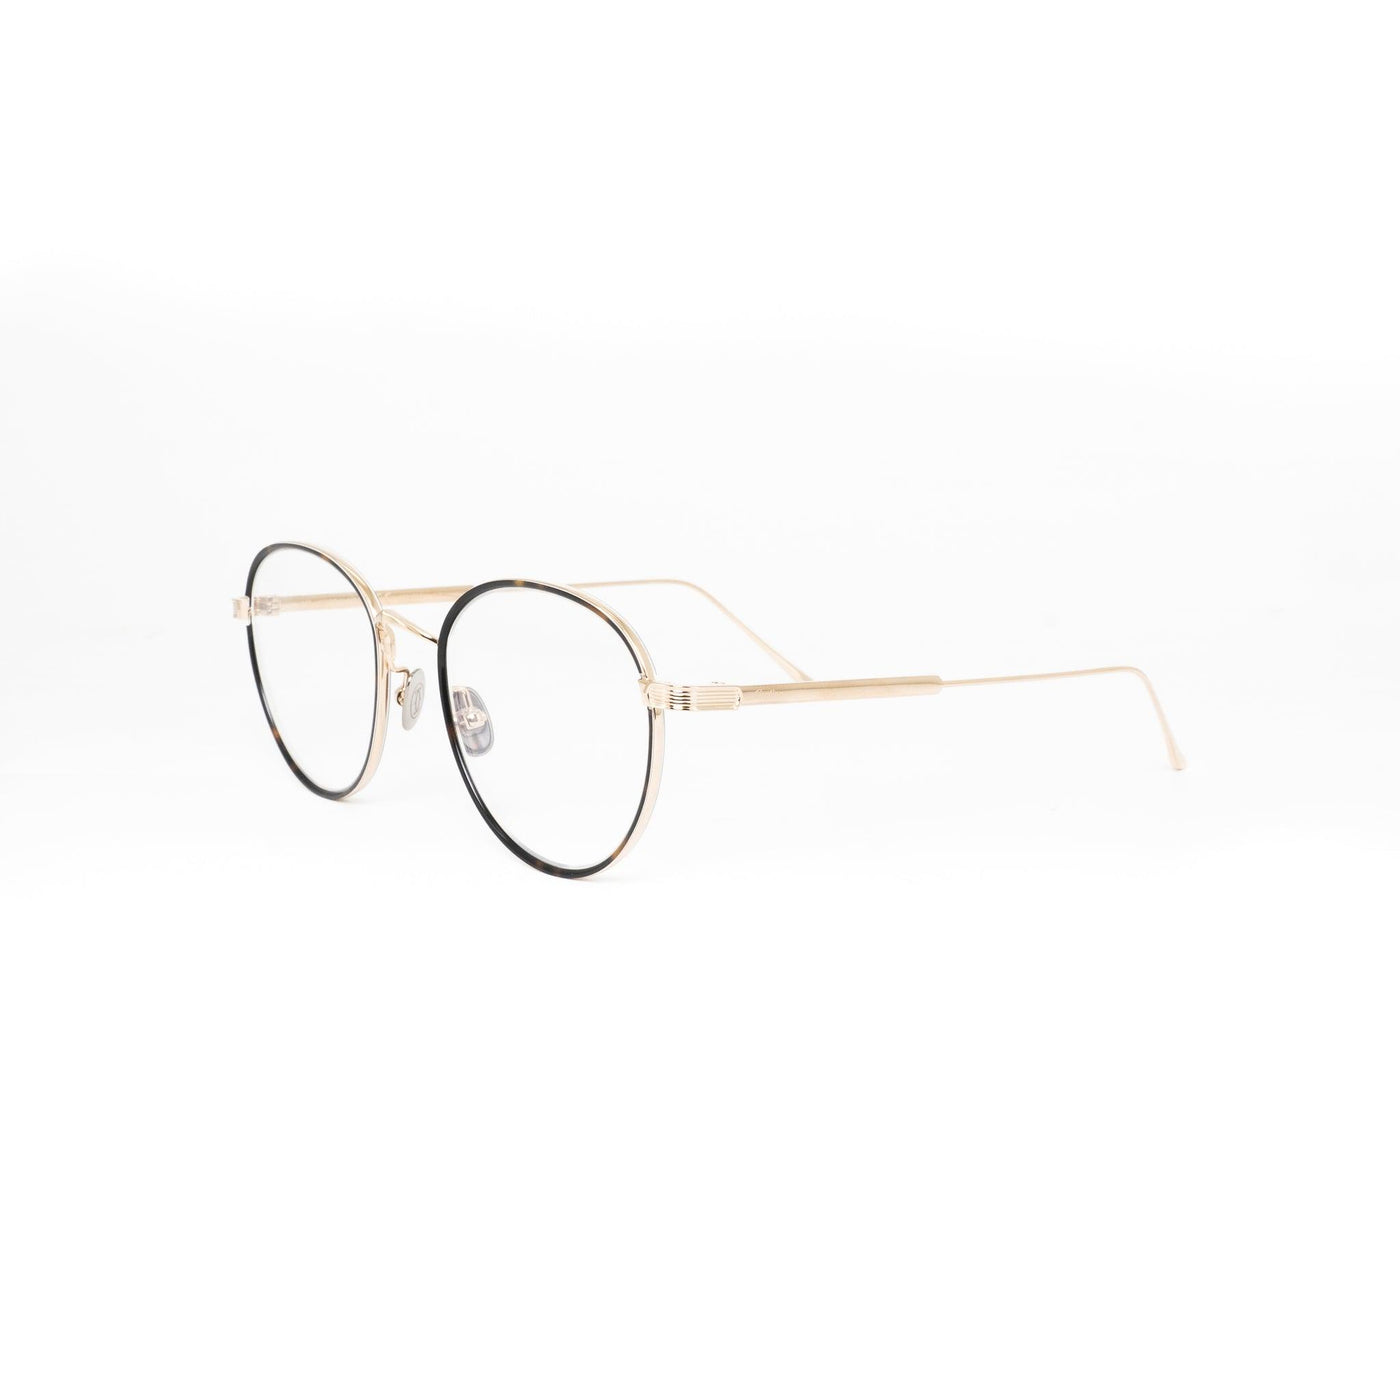 Cartier CT0250O/006 | Eyeglasses - Vision Express Optical Philippines